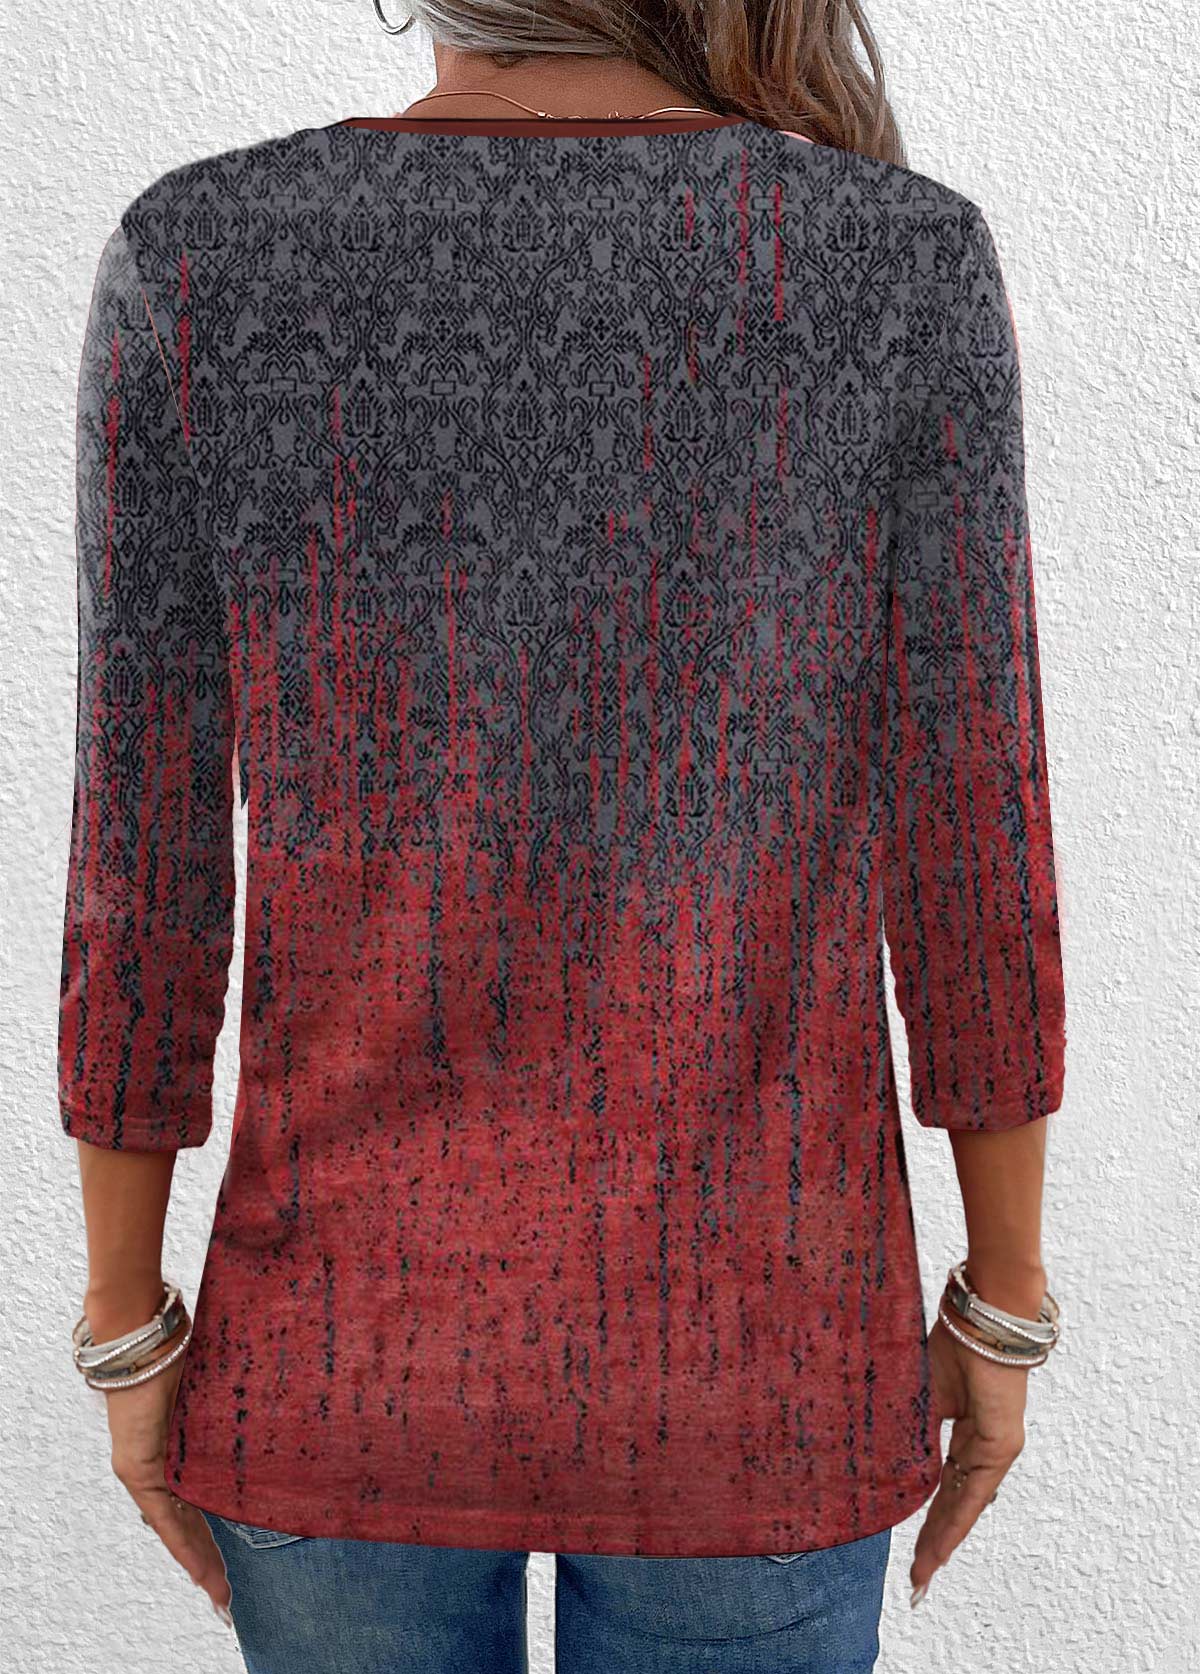 Wine Red Eyelet Ombre 3/4 Sleeve T Shirt